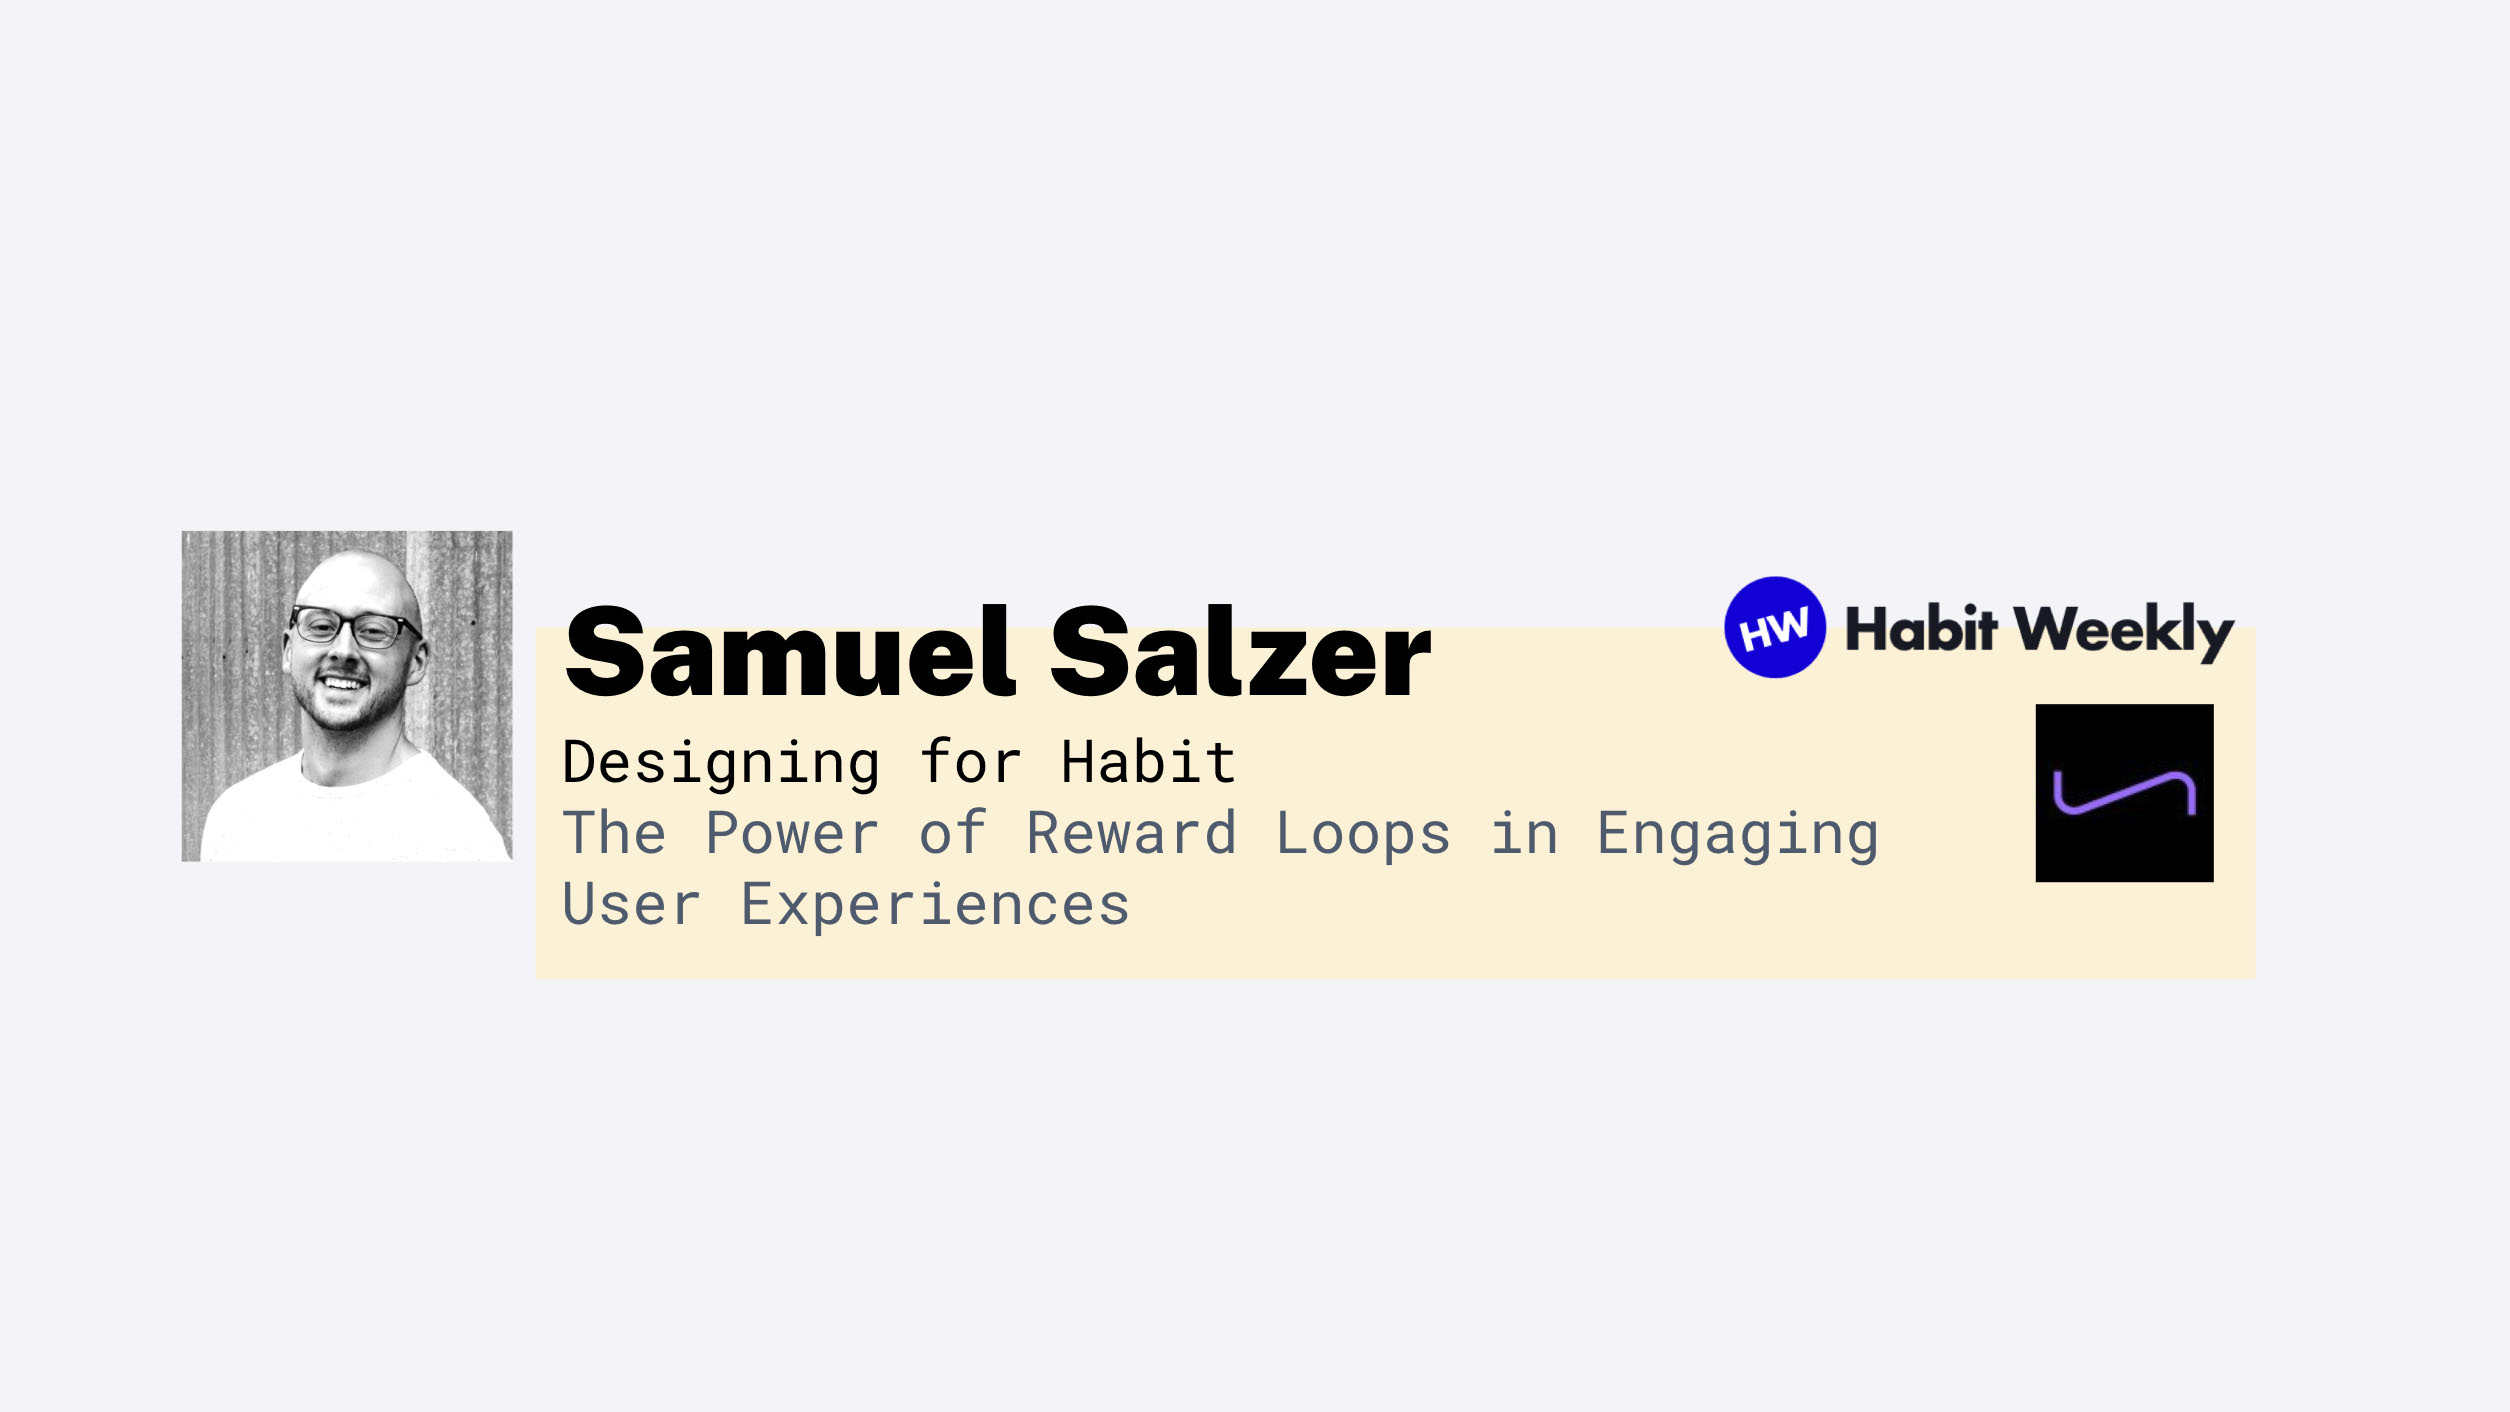 Designing for Habit - The Power of Reward Loops in Engaging User Experiences